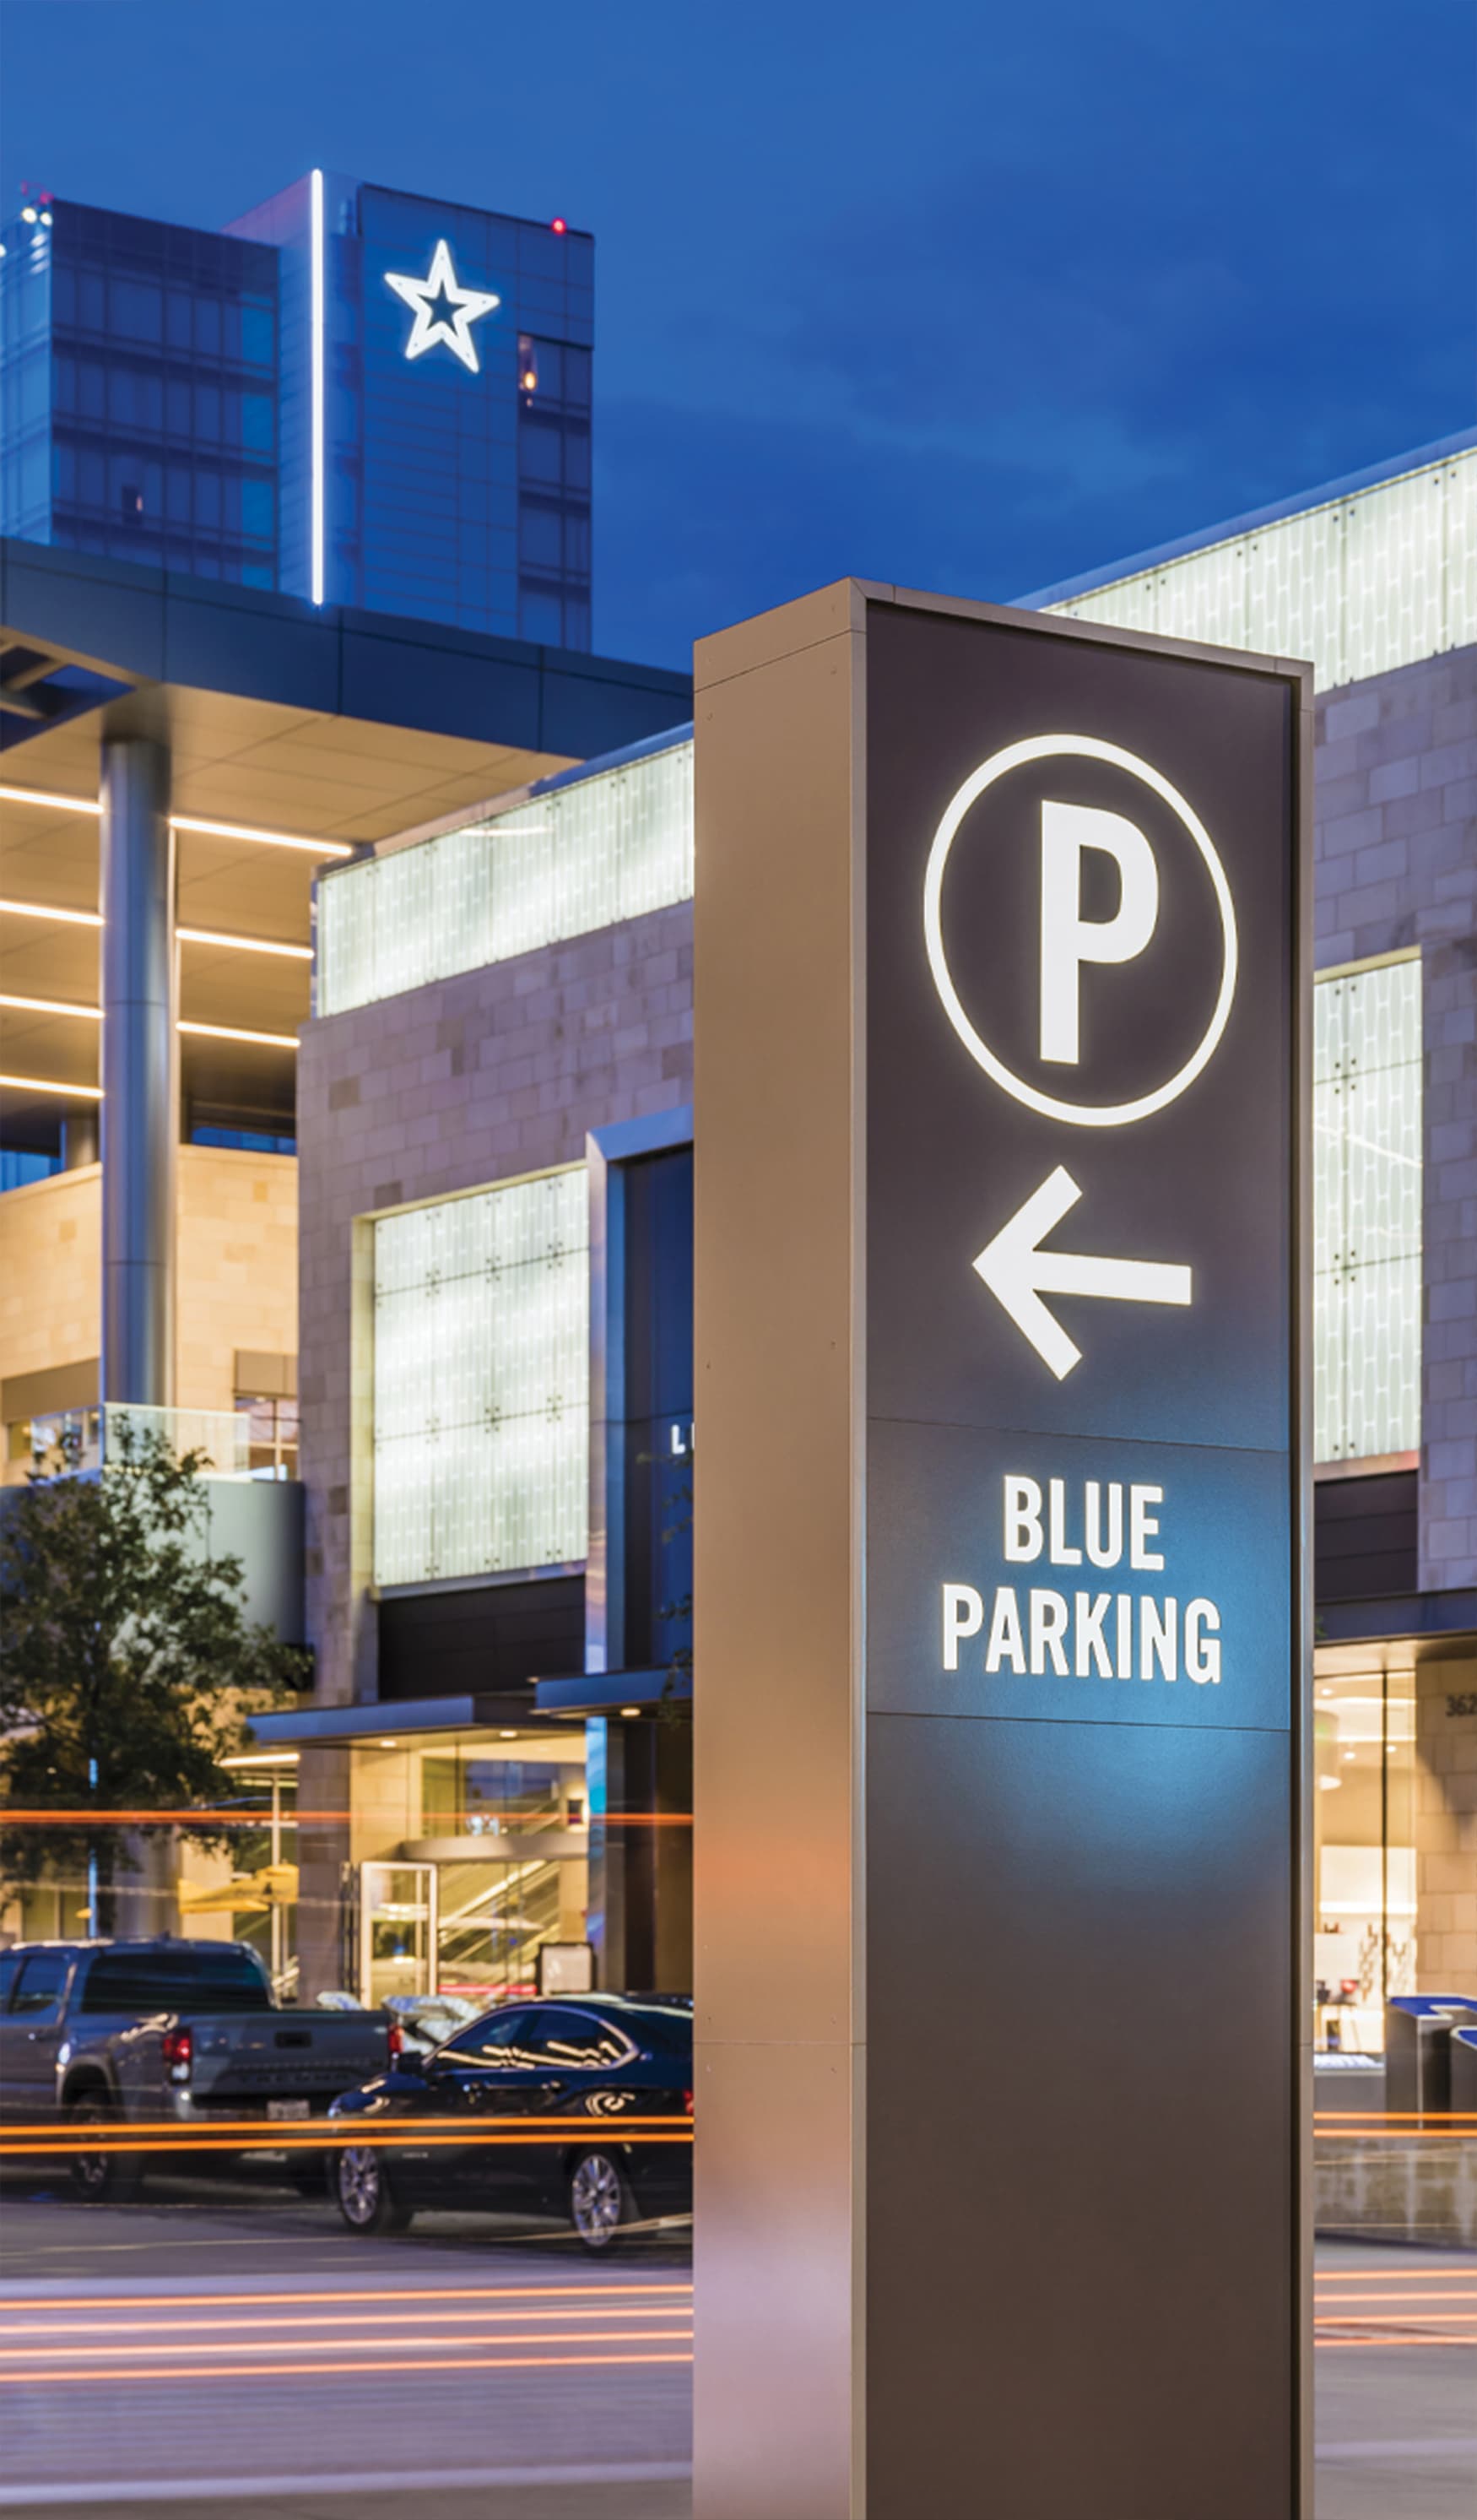 The Star Dallas Cowboys vehicular parking directional